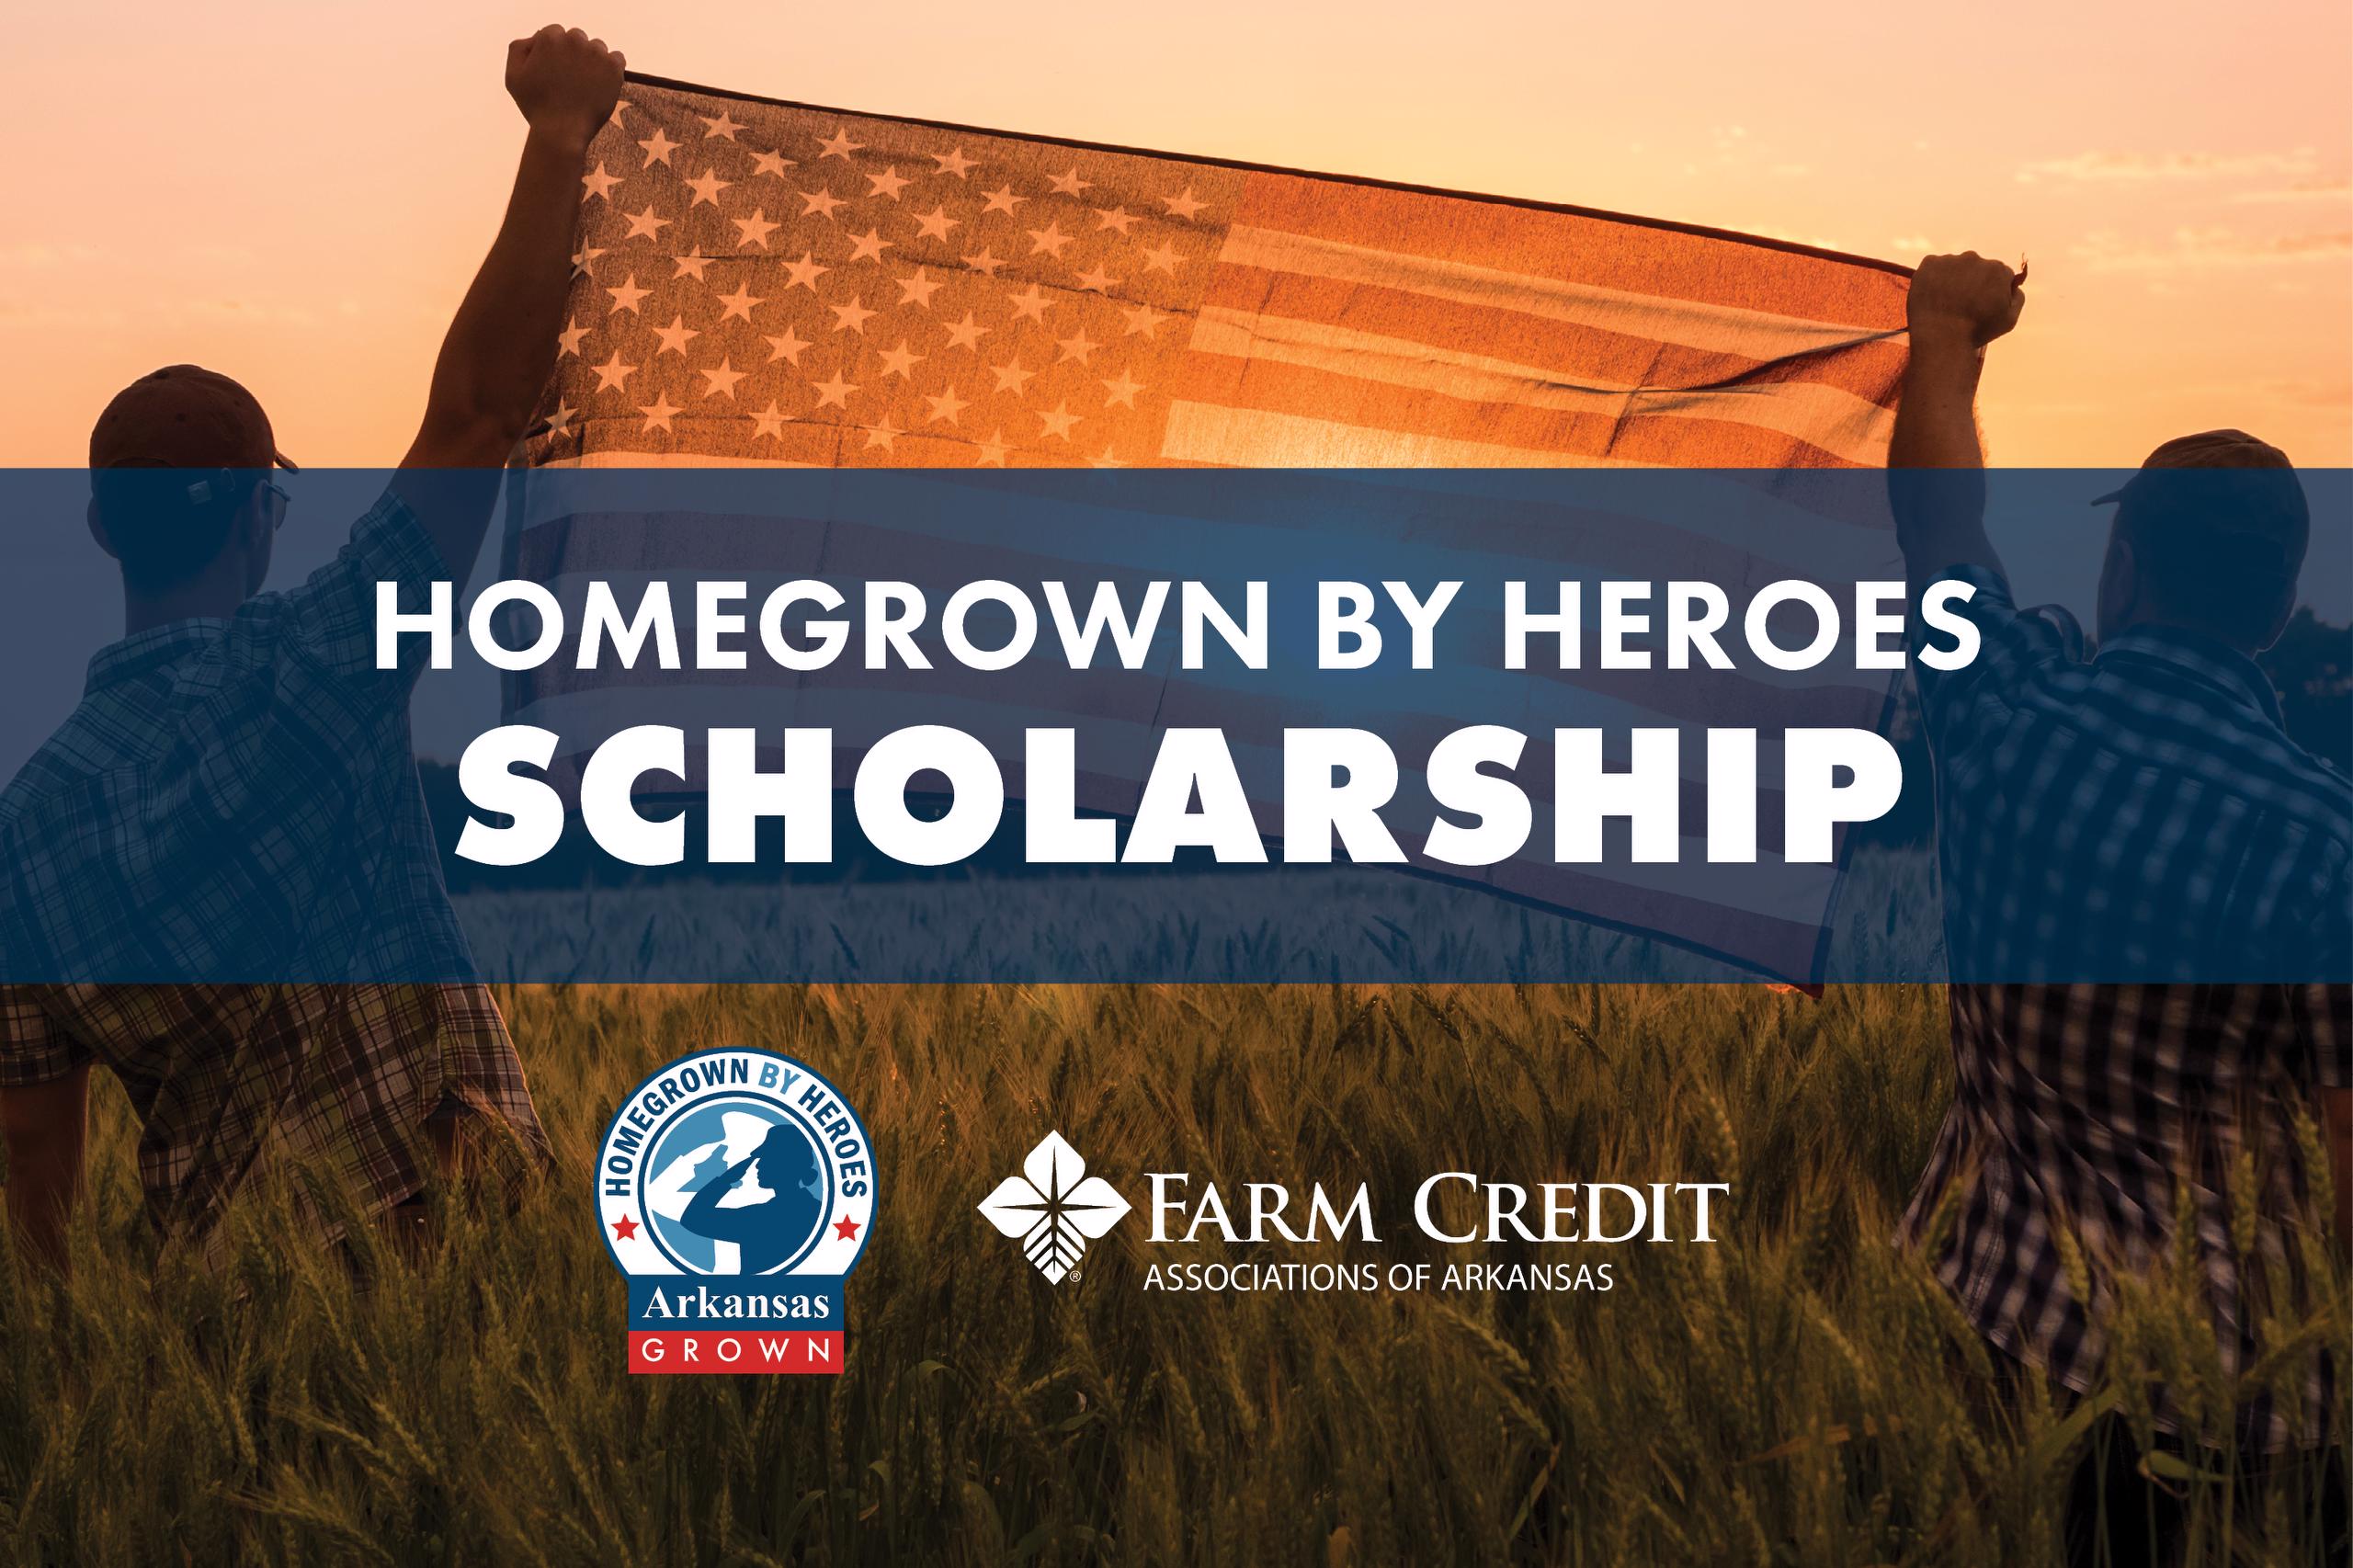 Homegrown by Heroes Scholarship